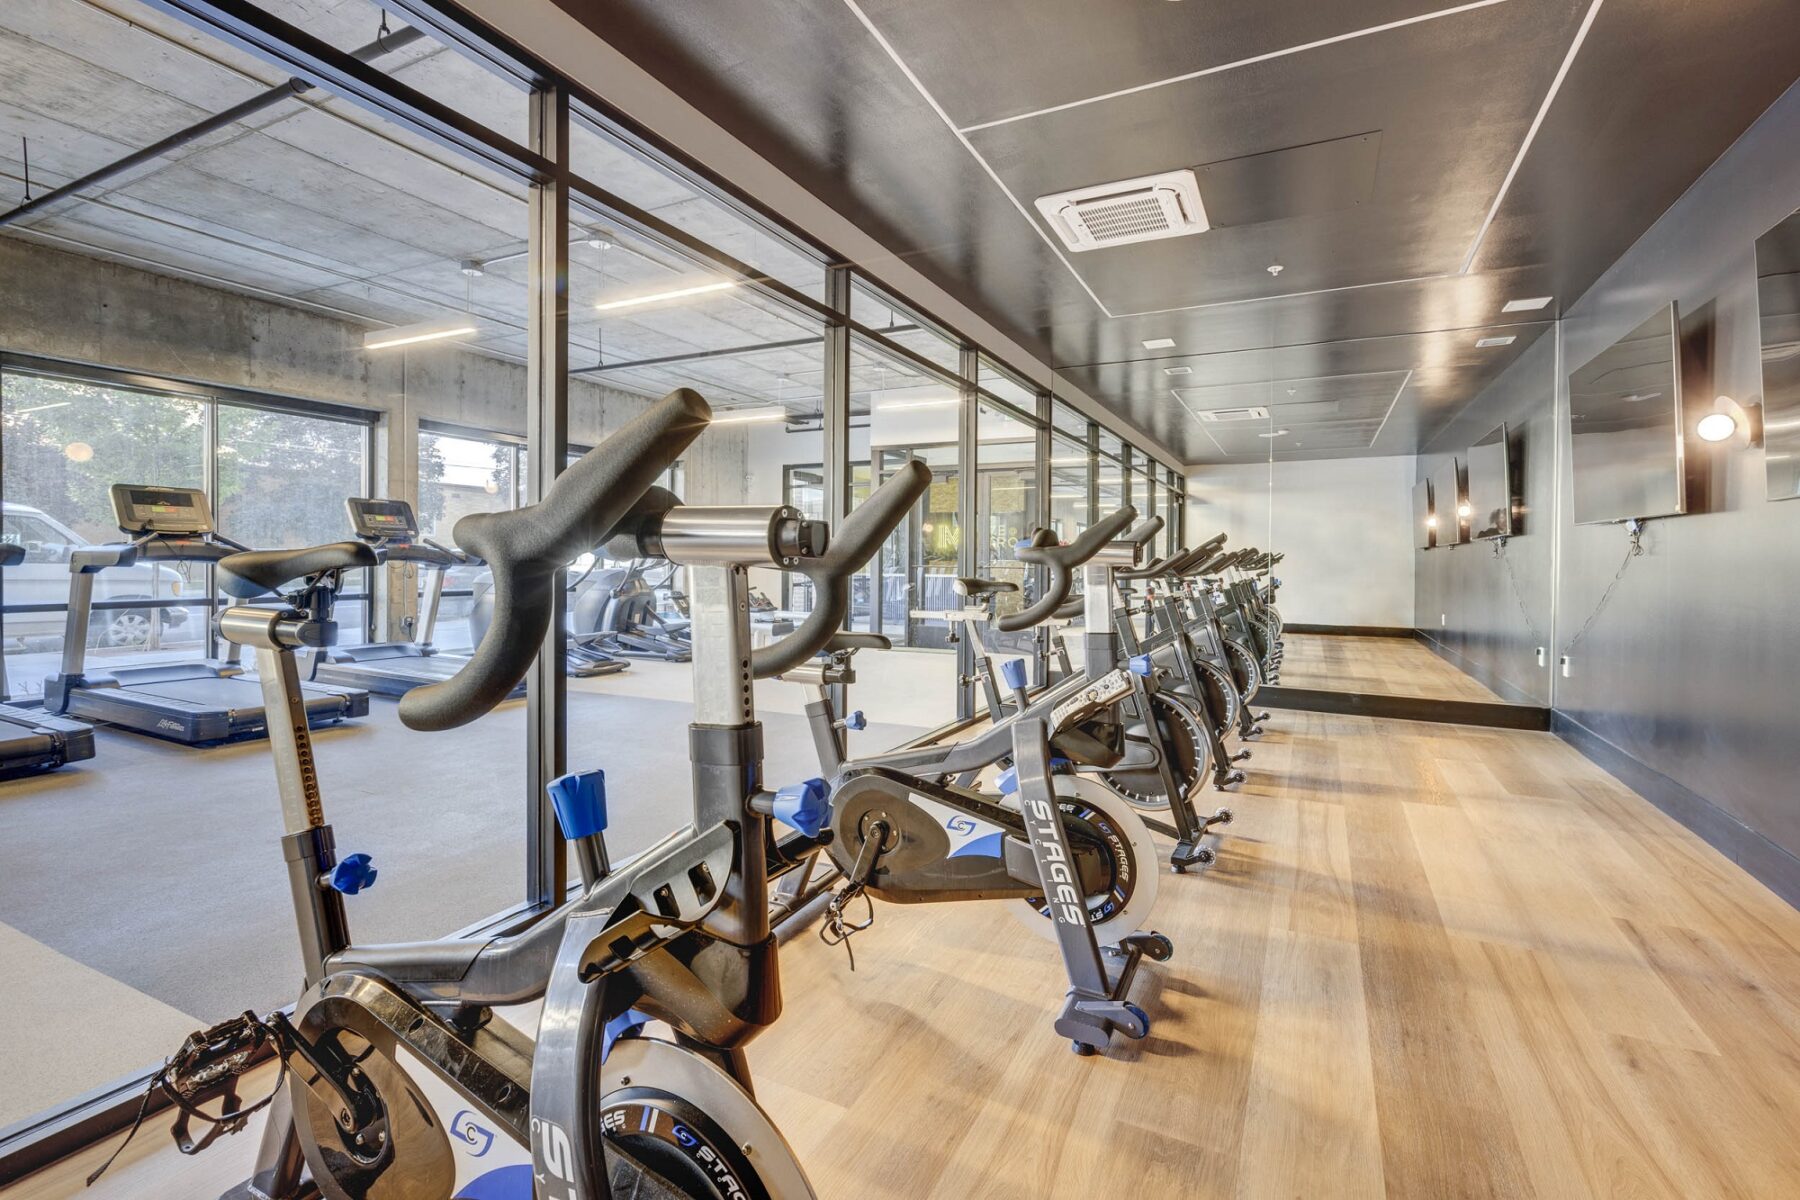 several Stationary bikes inside the indoor gym on light brown wooden floor